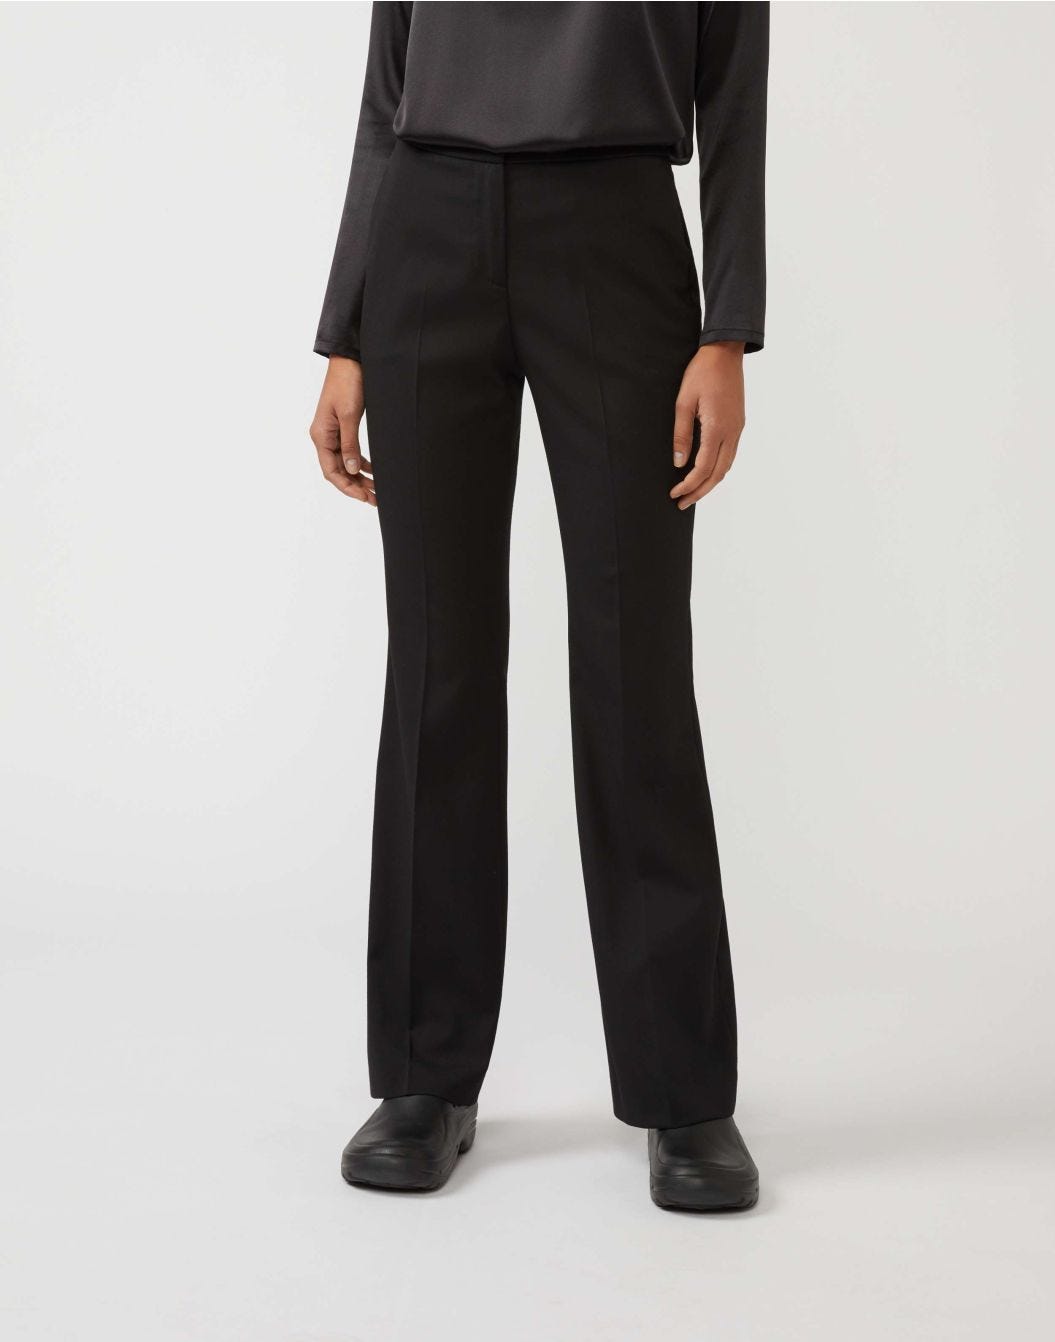 Bell-bottom trousers in cool black wool